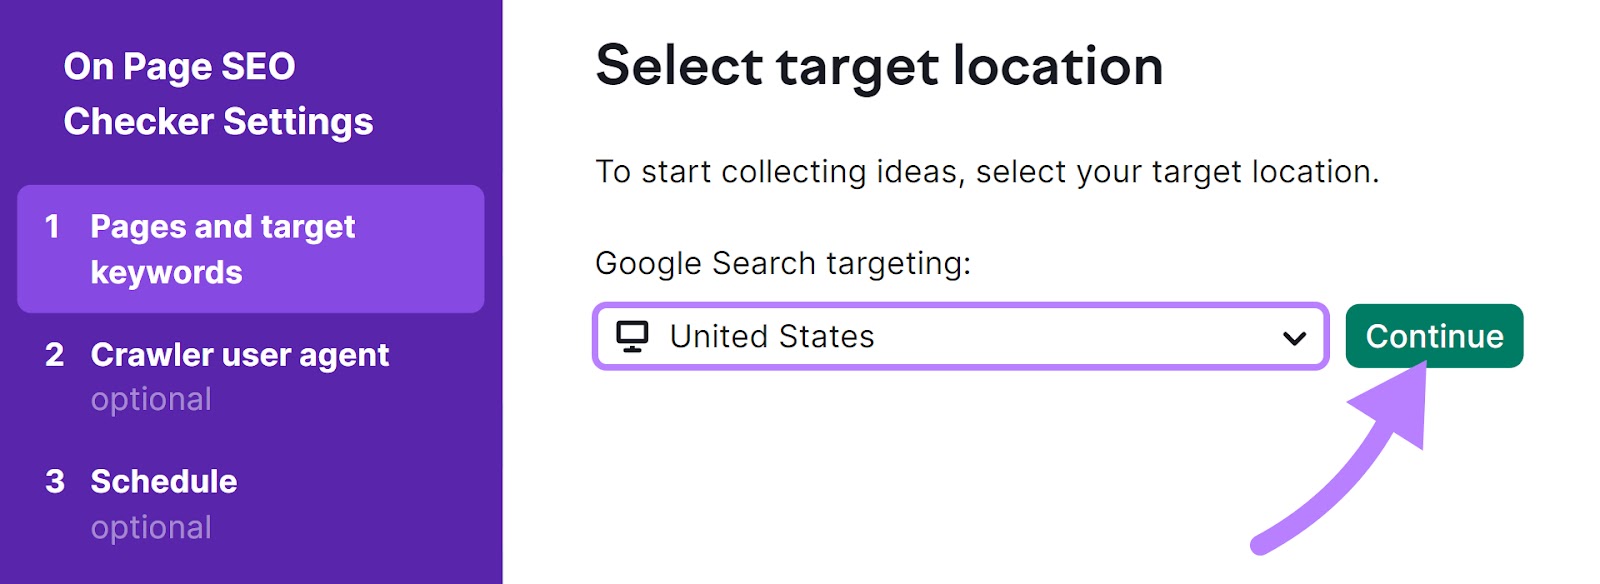 "United States" location selected in On Page SEO Checker